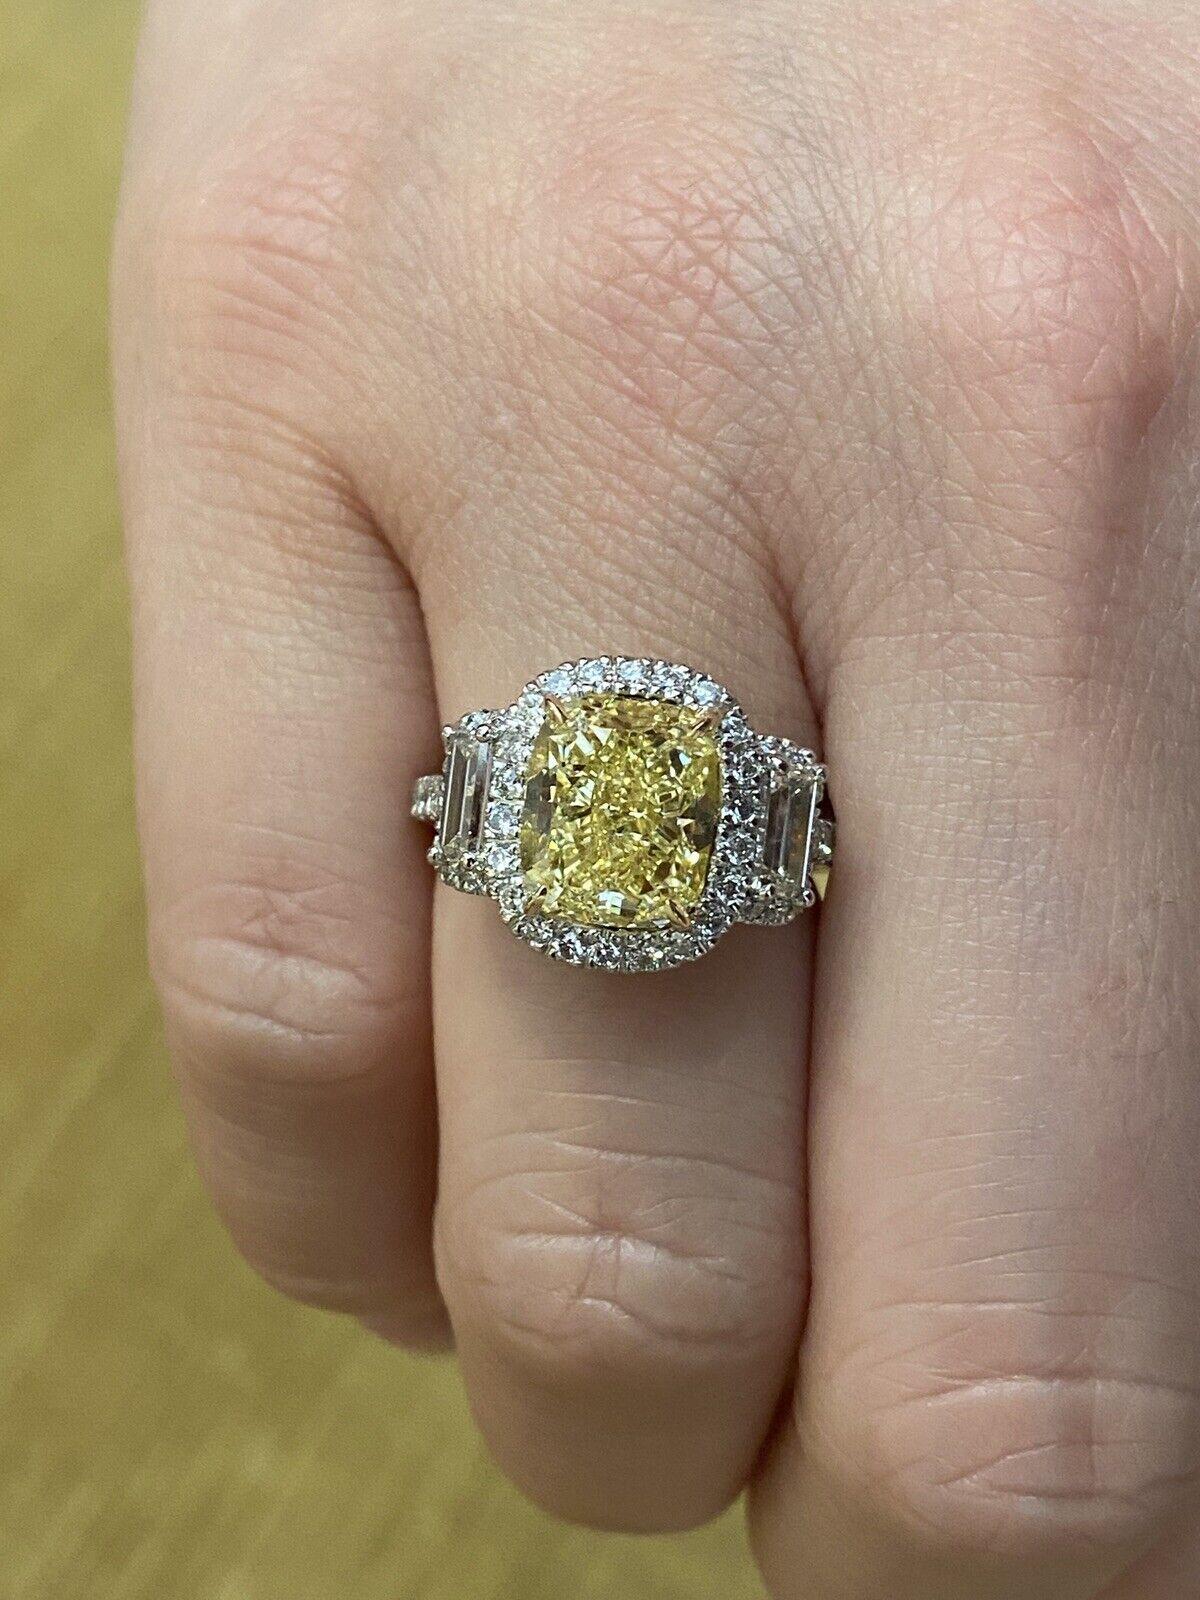 GIA 4.02 Carat Fancy Yellow Cushion VS1 Diamond Ring in Platinum and 18k Gold In Excellent Condition For Sale In La Jolla, CA